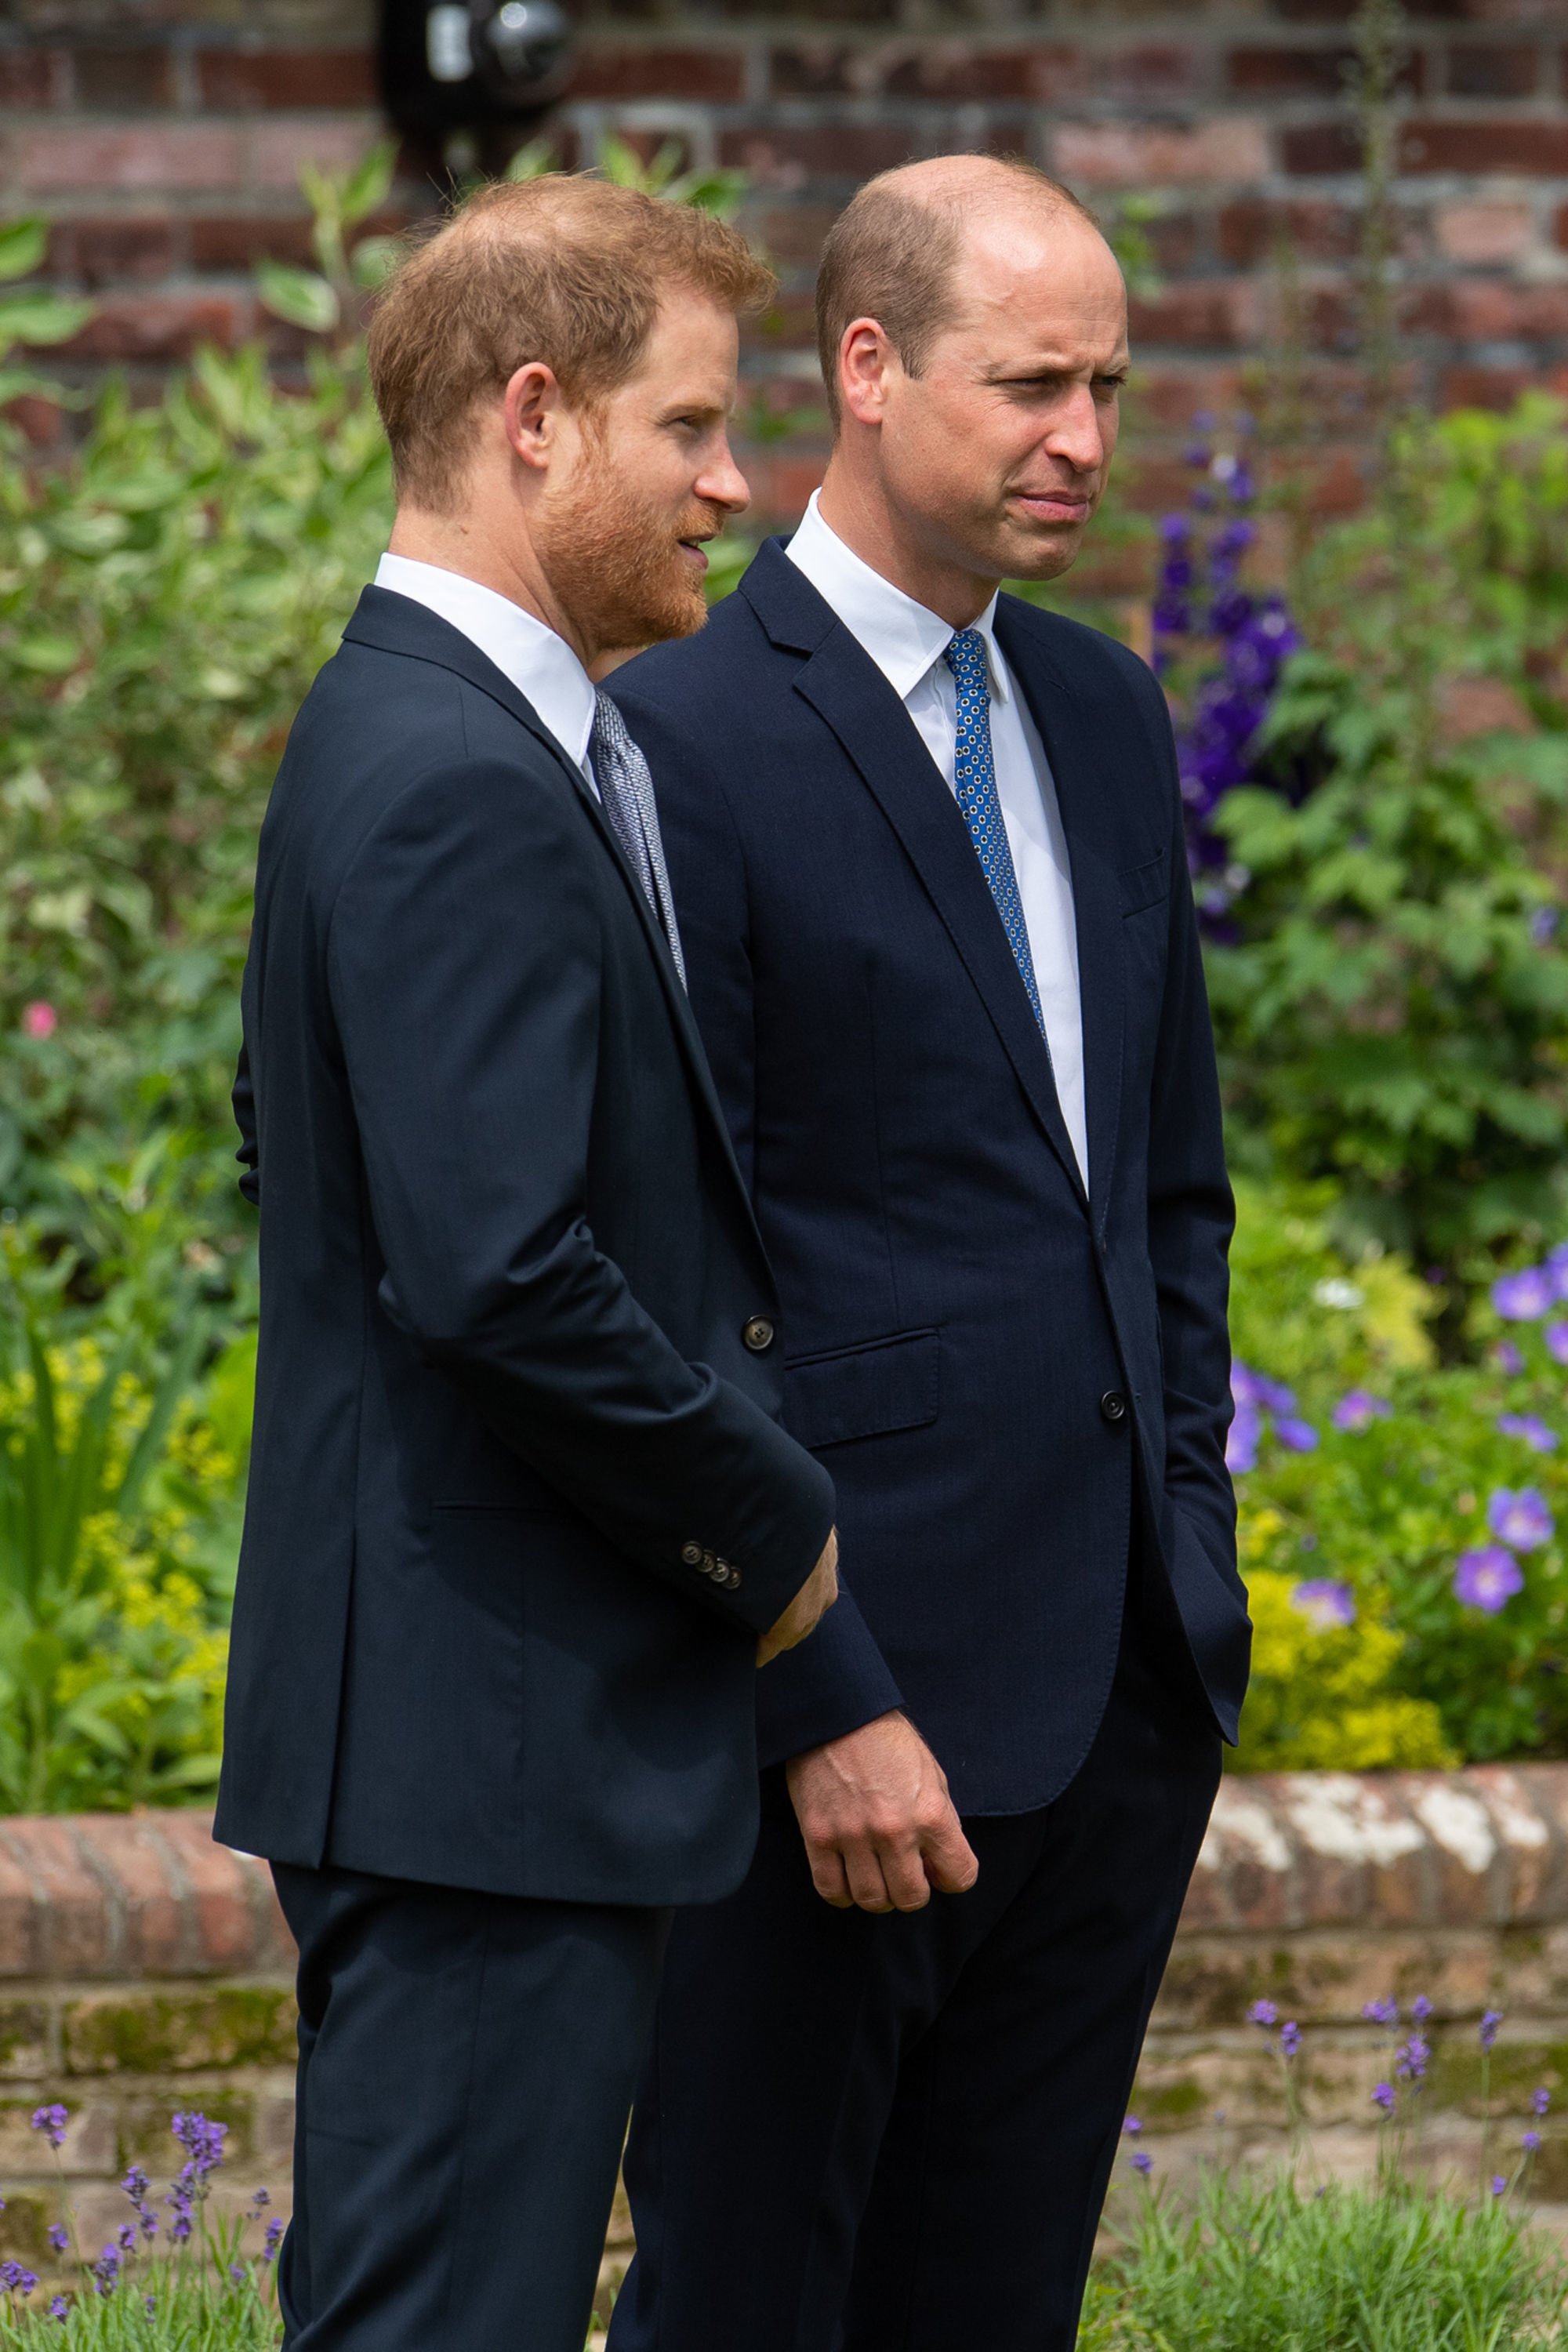 Prince Harry and Prince William during the unveiling of a statue they commissioned of their mother Diana, Princess of Wales, in the Sunken Garden at Kensington Palace, on what would have been her 60th birthday on July 1, 2021, in London, England. | Source: Getty Images